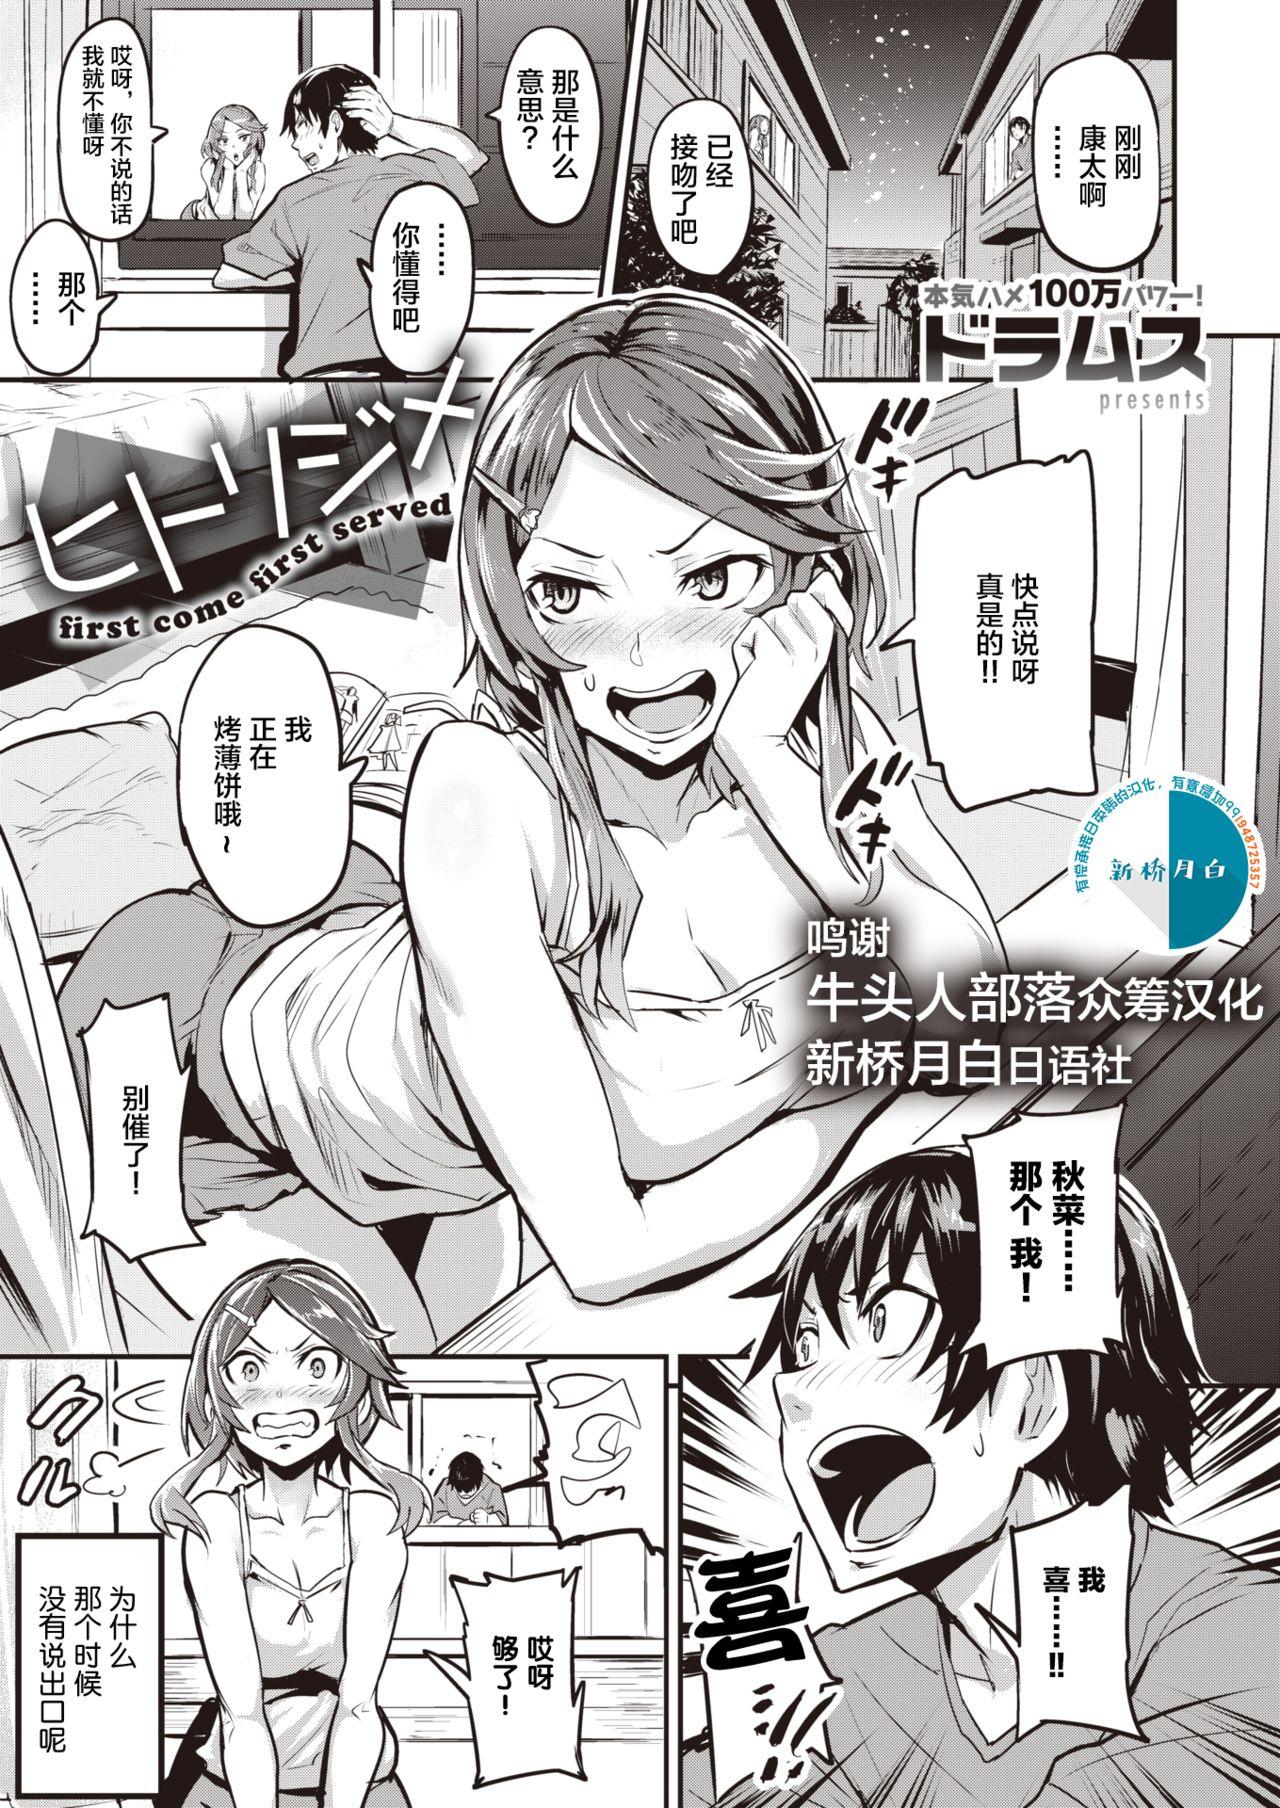 Exhib [Dramus] Hitorijime - first come first served Ch. 1-3 [Chinese] [牛头人部落×新桥月白日语社] Petite Porn - Page 1